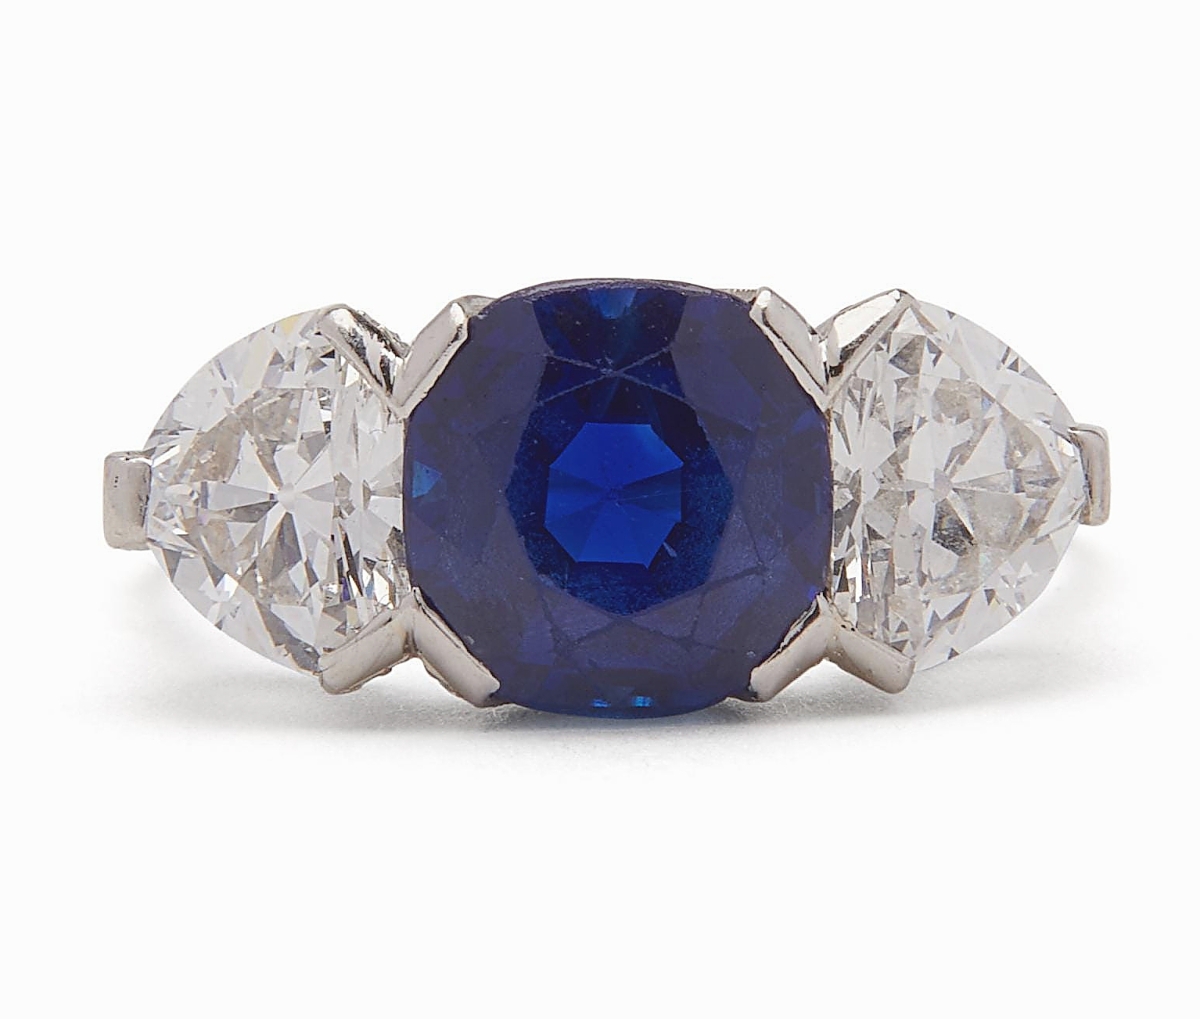 The top three jewelry lots in the sale were platinum, sapphire and diamond rings of unusual color, exceptional quality and provenance. This one, a circa 1910 ring with a rare 4.31-carat Kashmir sapphire, was the top priced piece of jewelry, finishing at $287,500. It was accompanied by an AGL report certifying the stone.